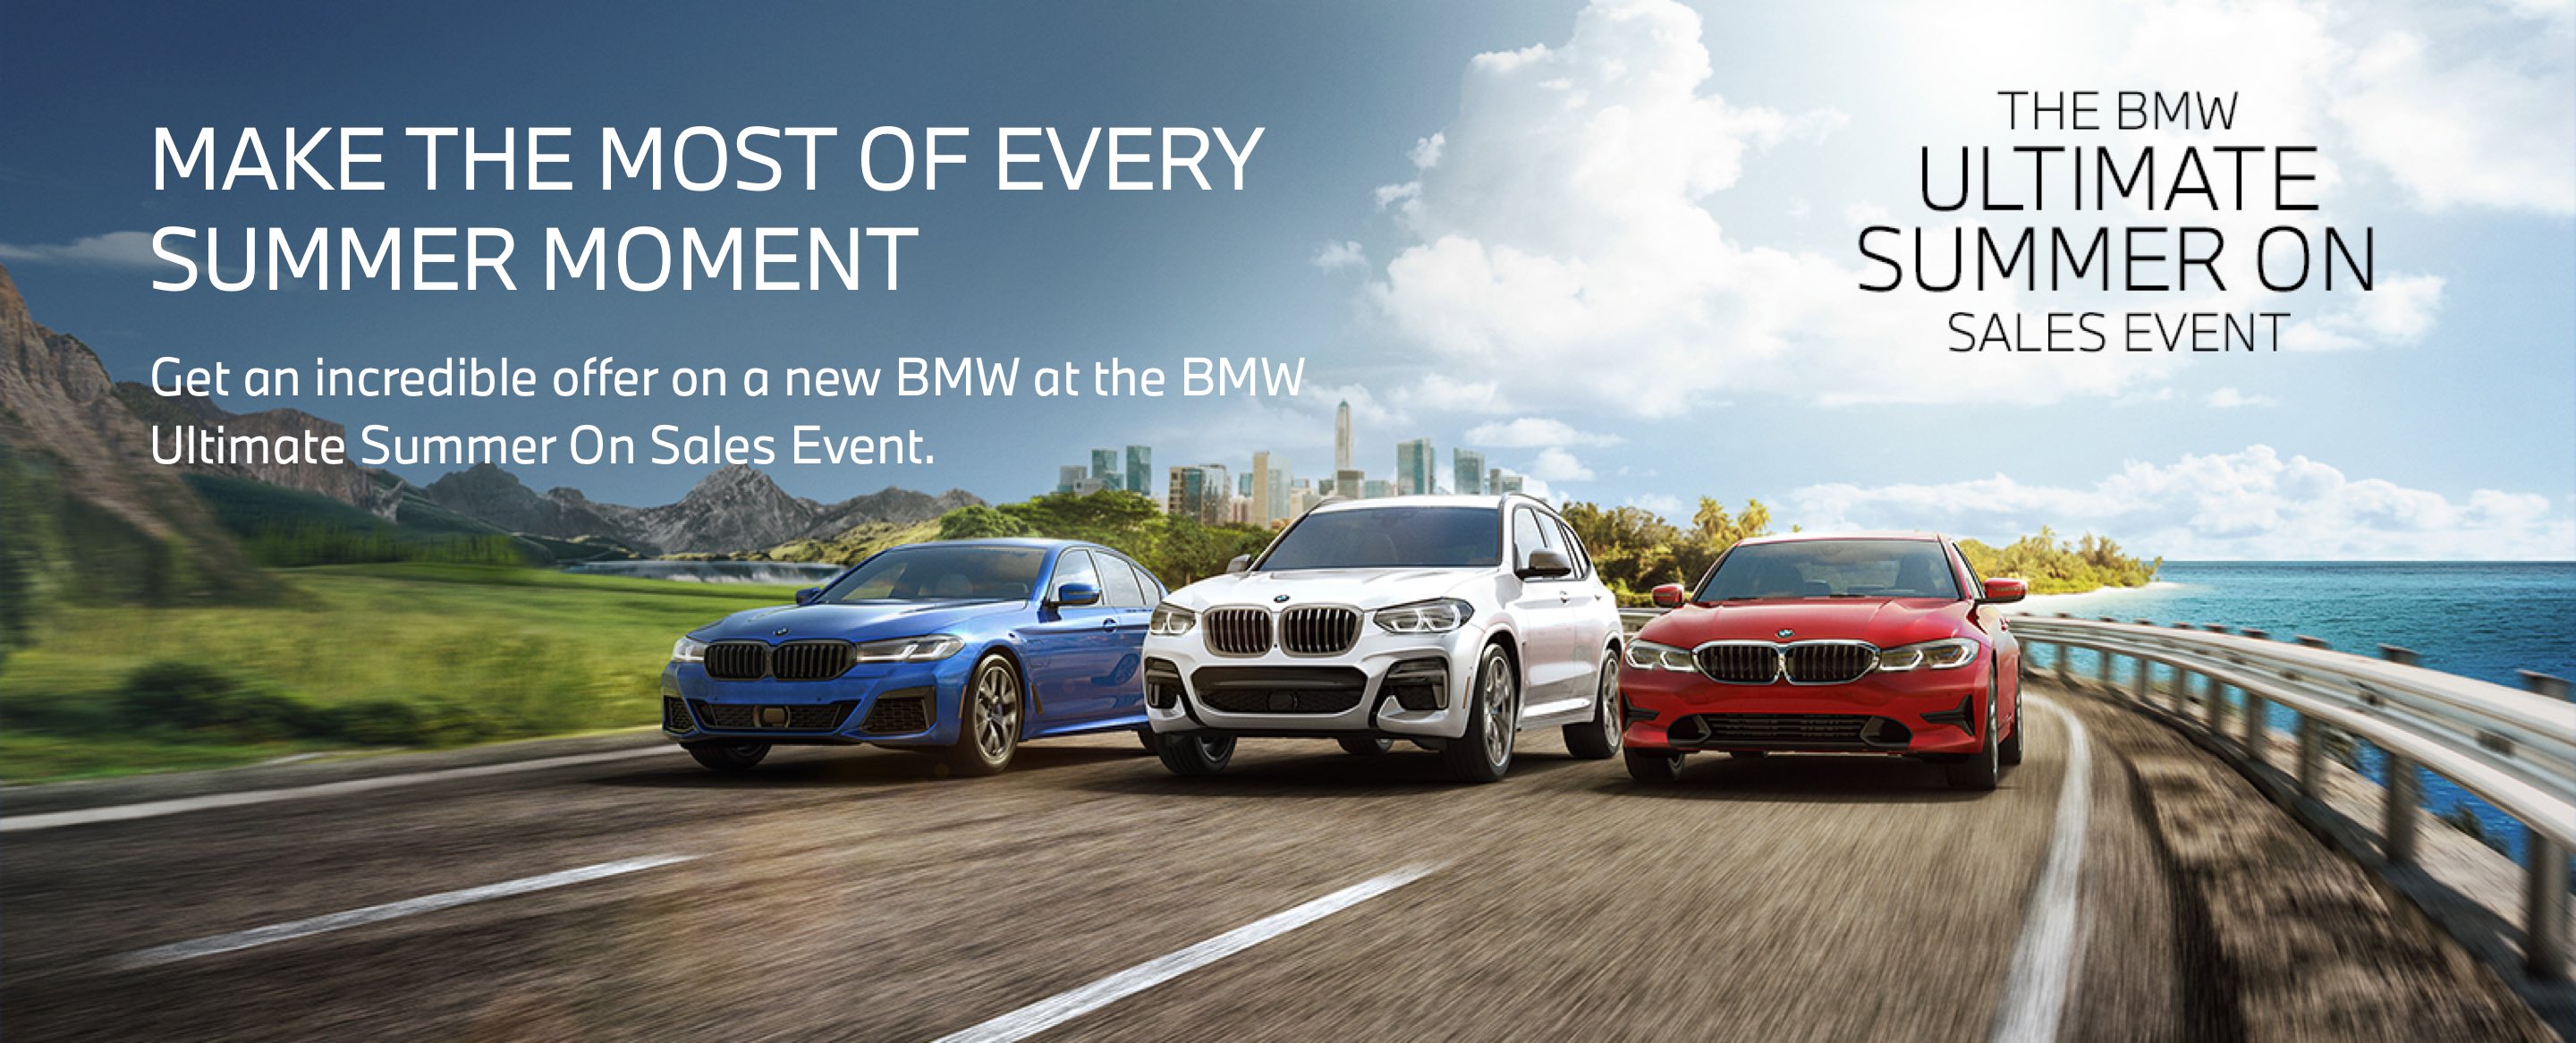 The BMW Ultimate Summer On Sales Event